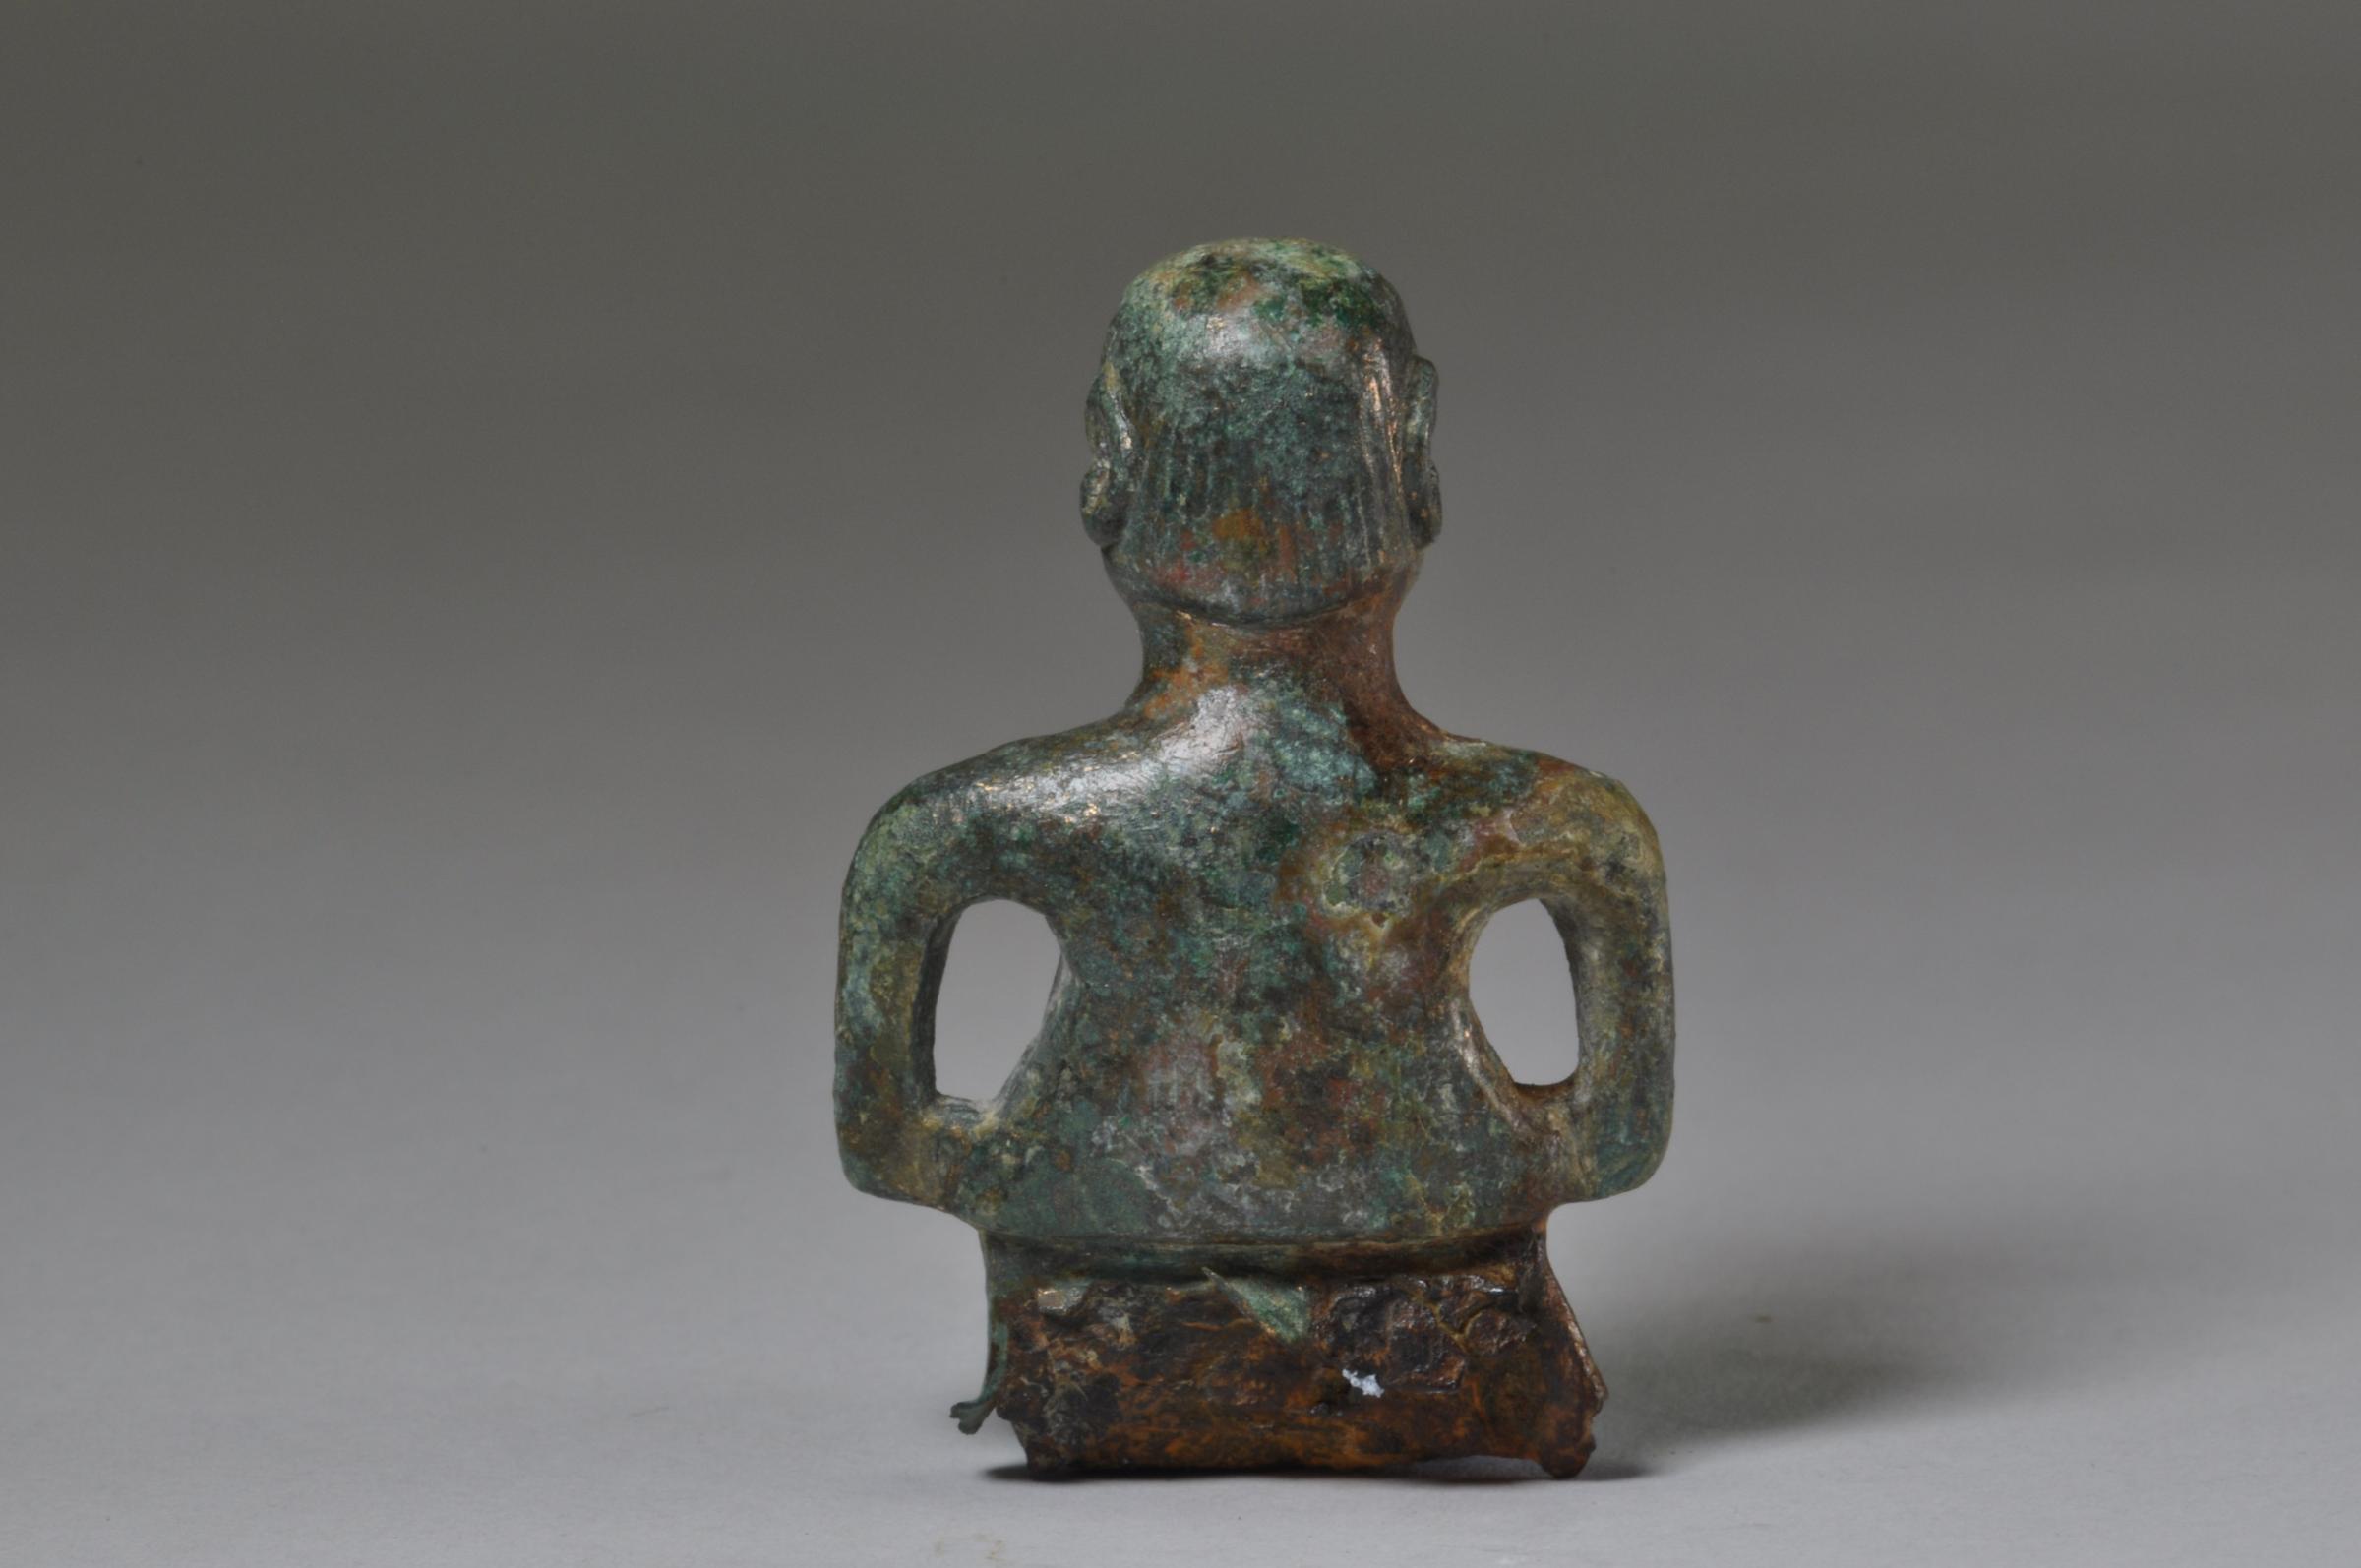 Figurine discovered at a dig at the National Trusts Wimpole Estate